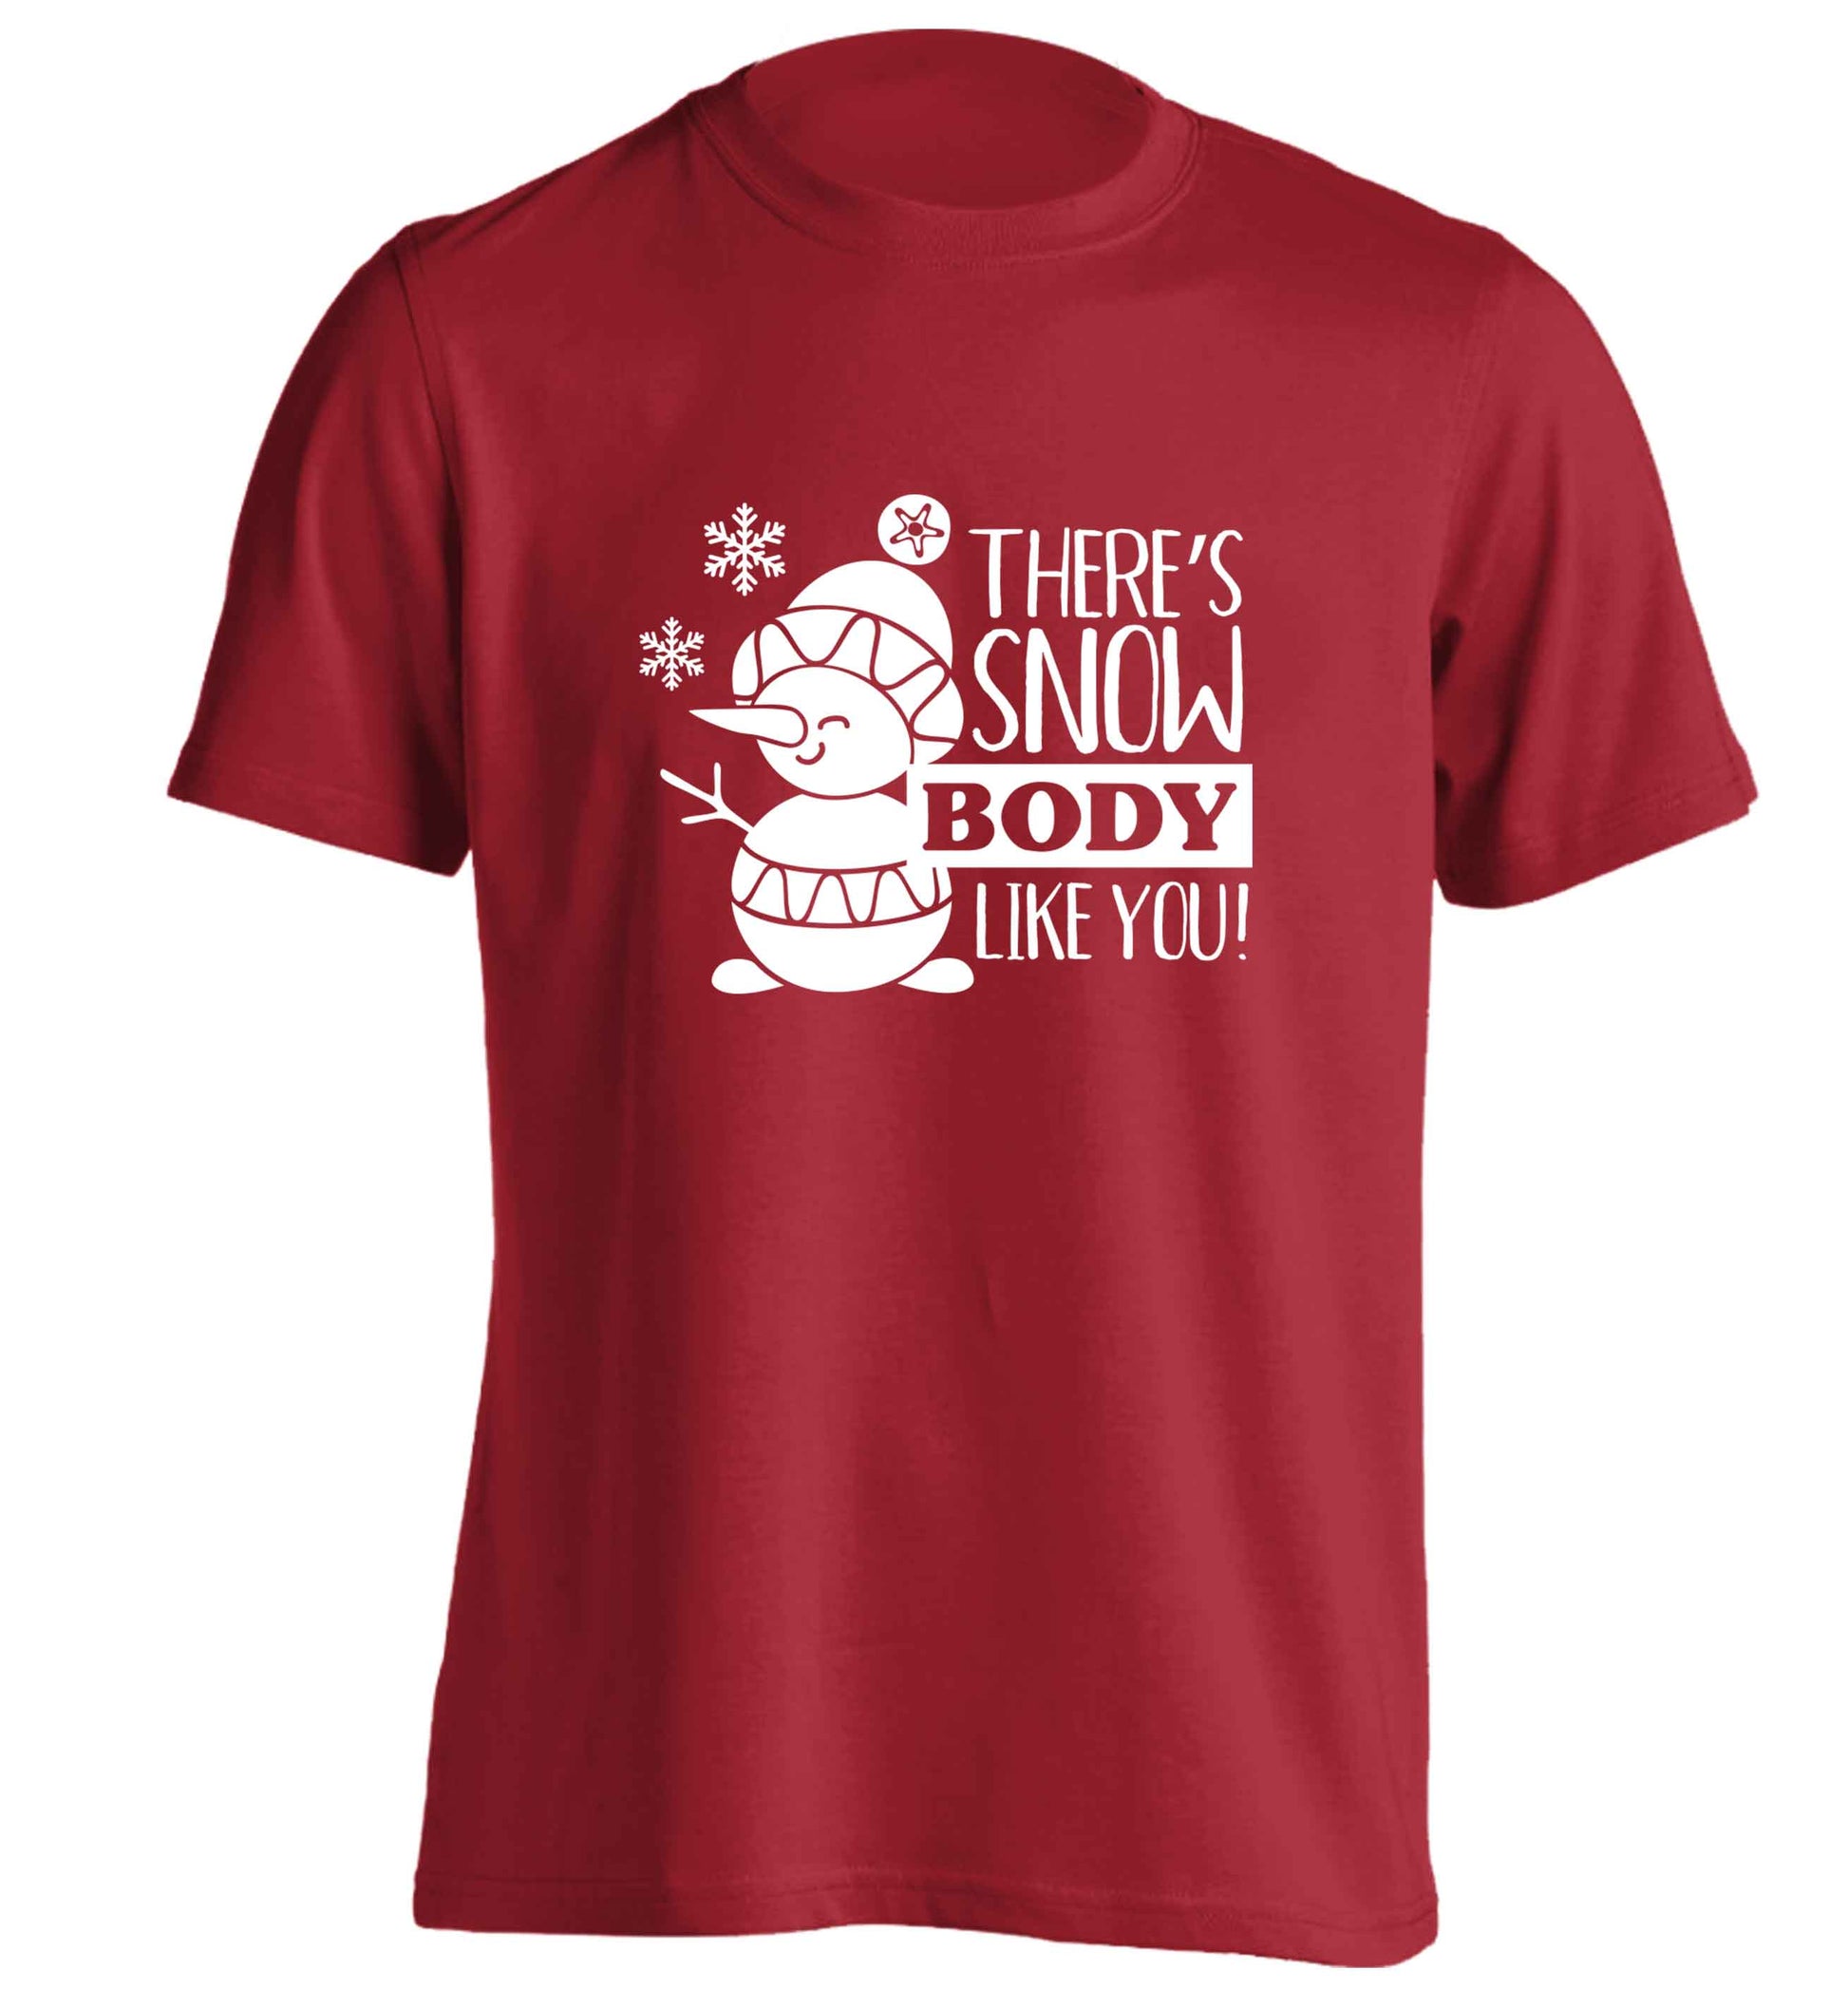 There's snow body like you adults unisex red Tshirt 2XL